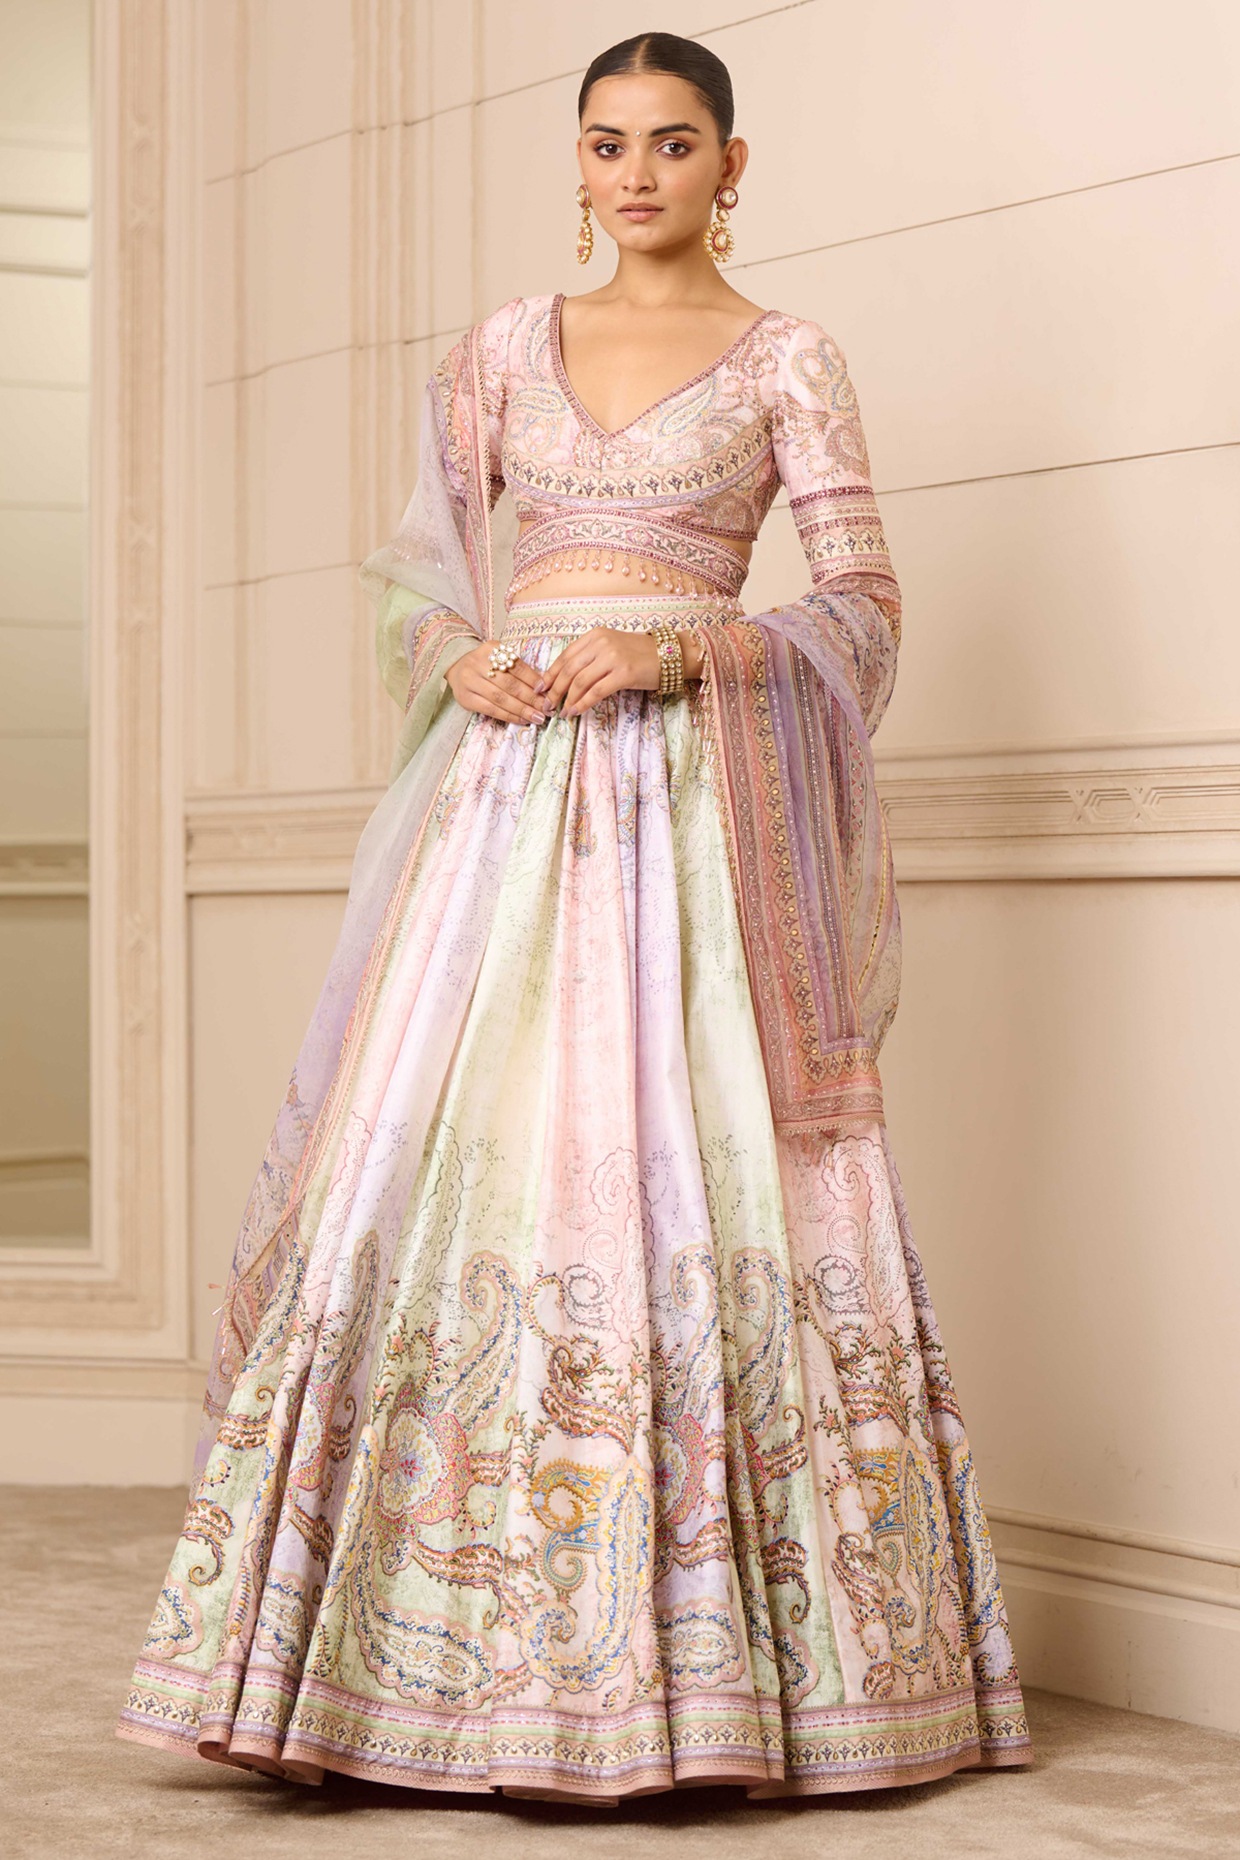 Glam Wedding With The Bride In A Multicolored Lehenga